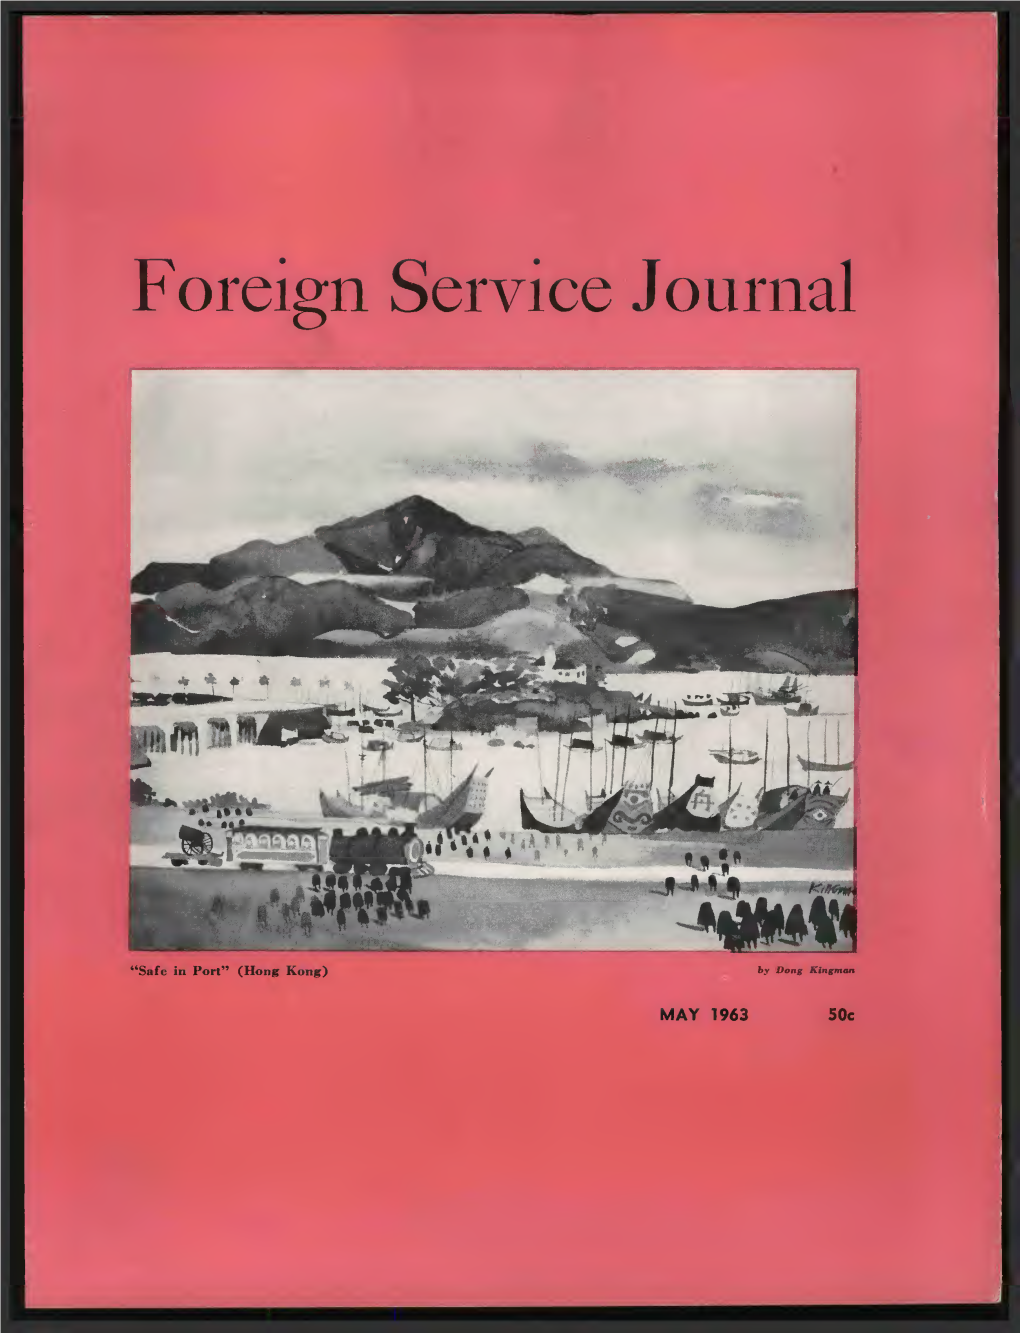 The Foreign Service Journal, May 1963